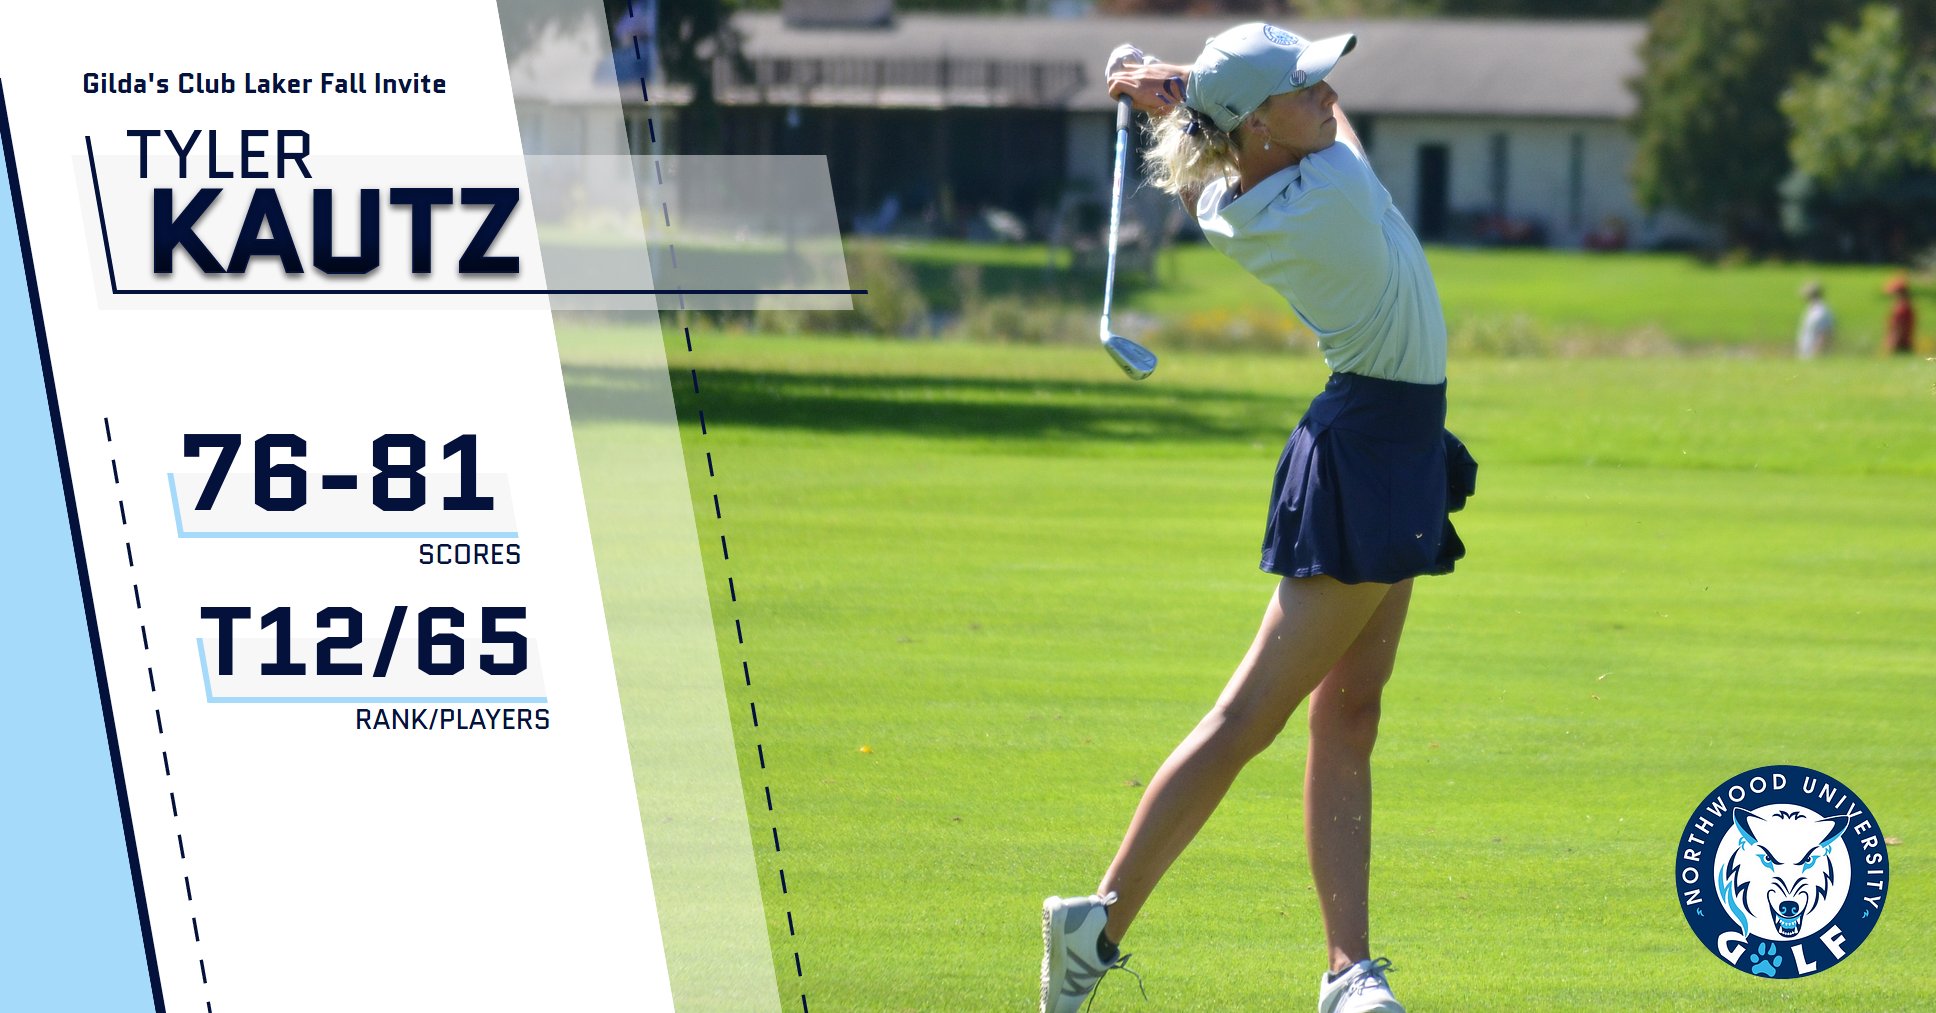 Women's Golf Places Fourth At Gilda's Club Laker Fall Invite